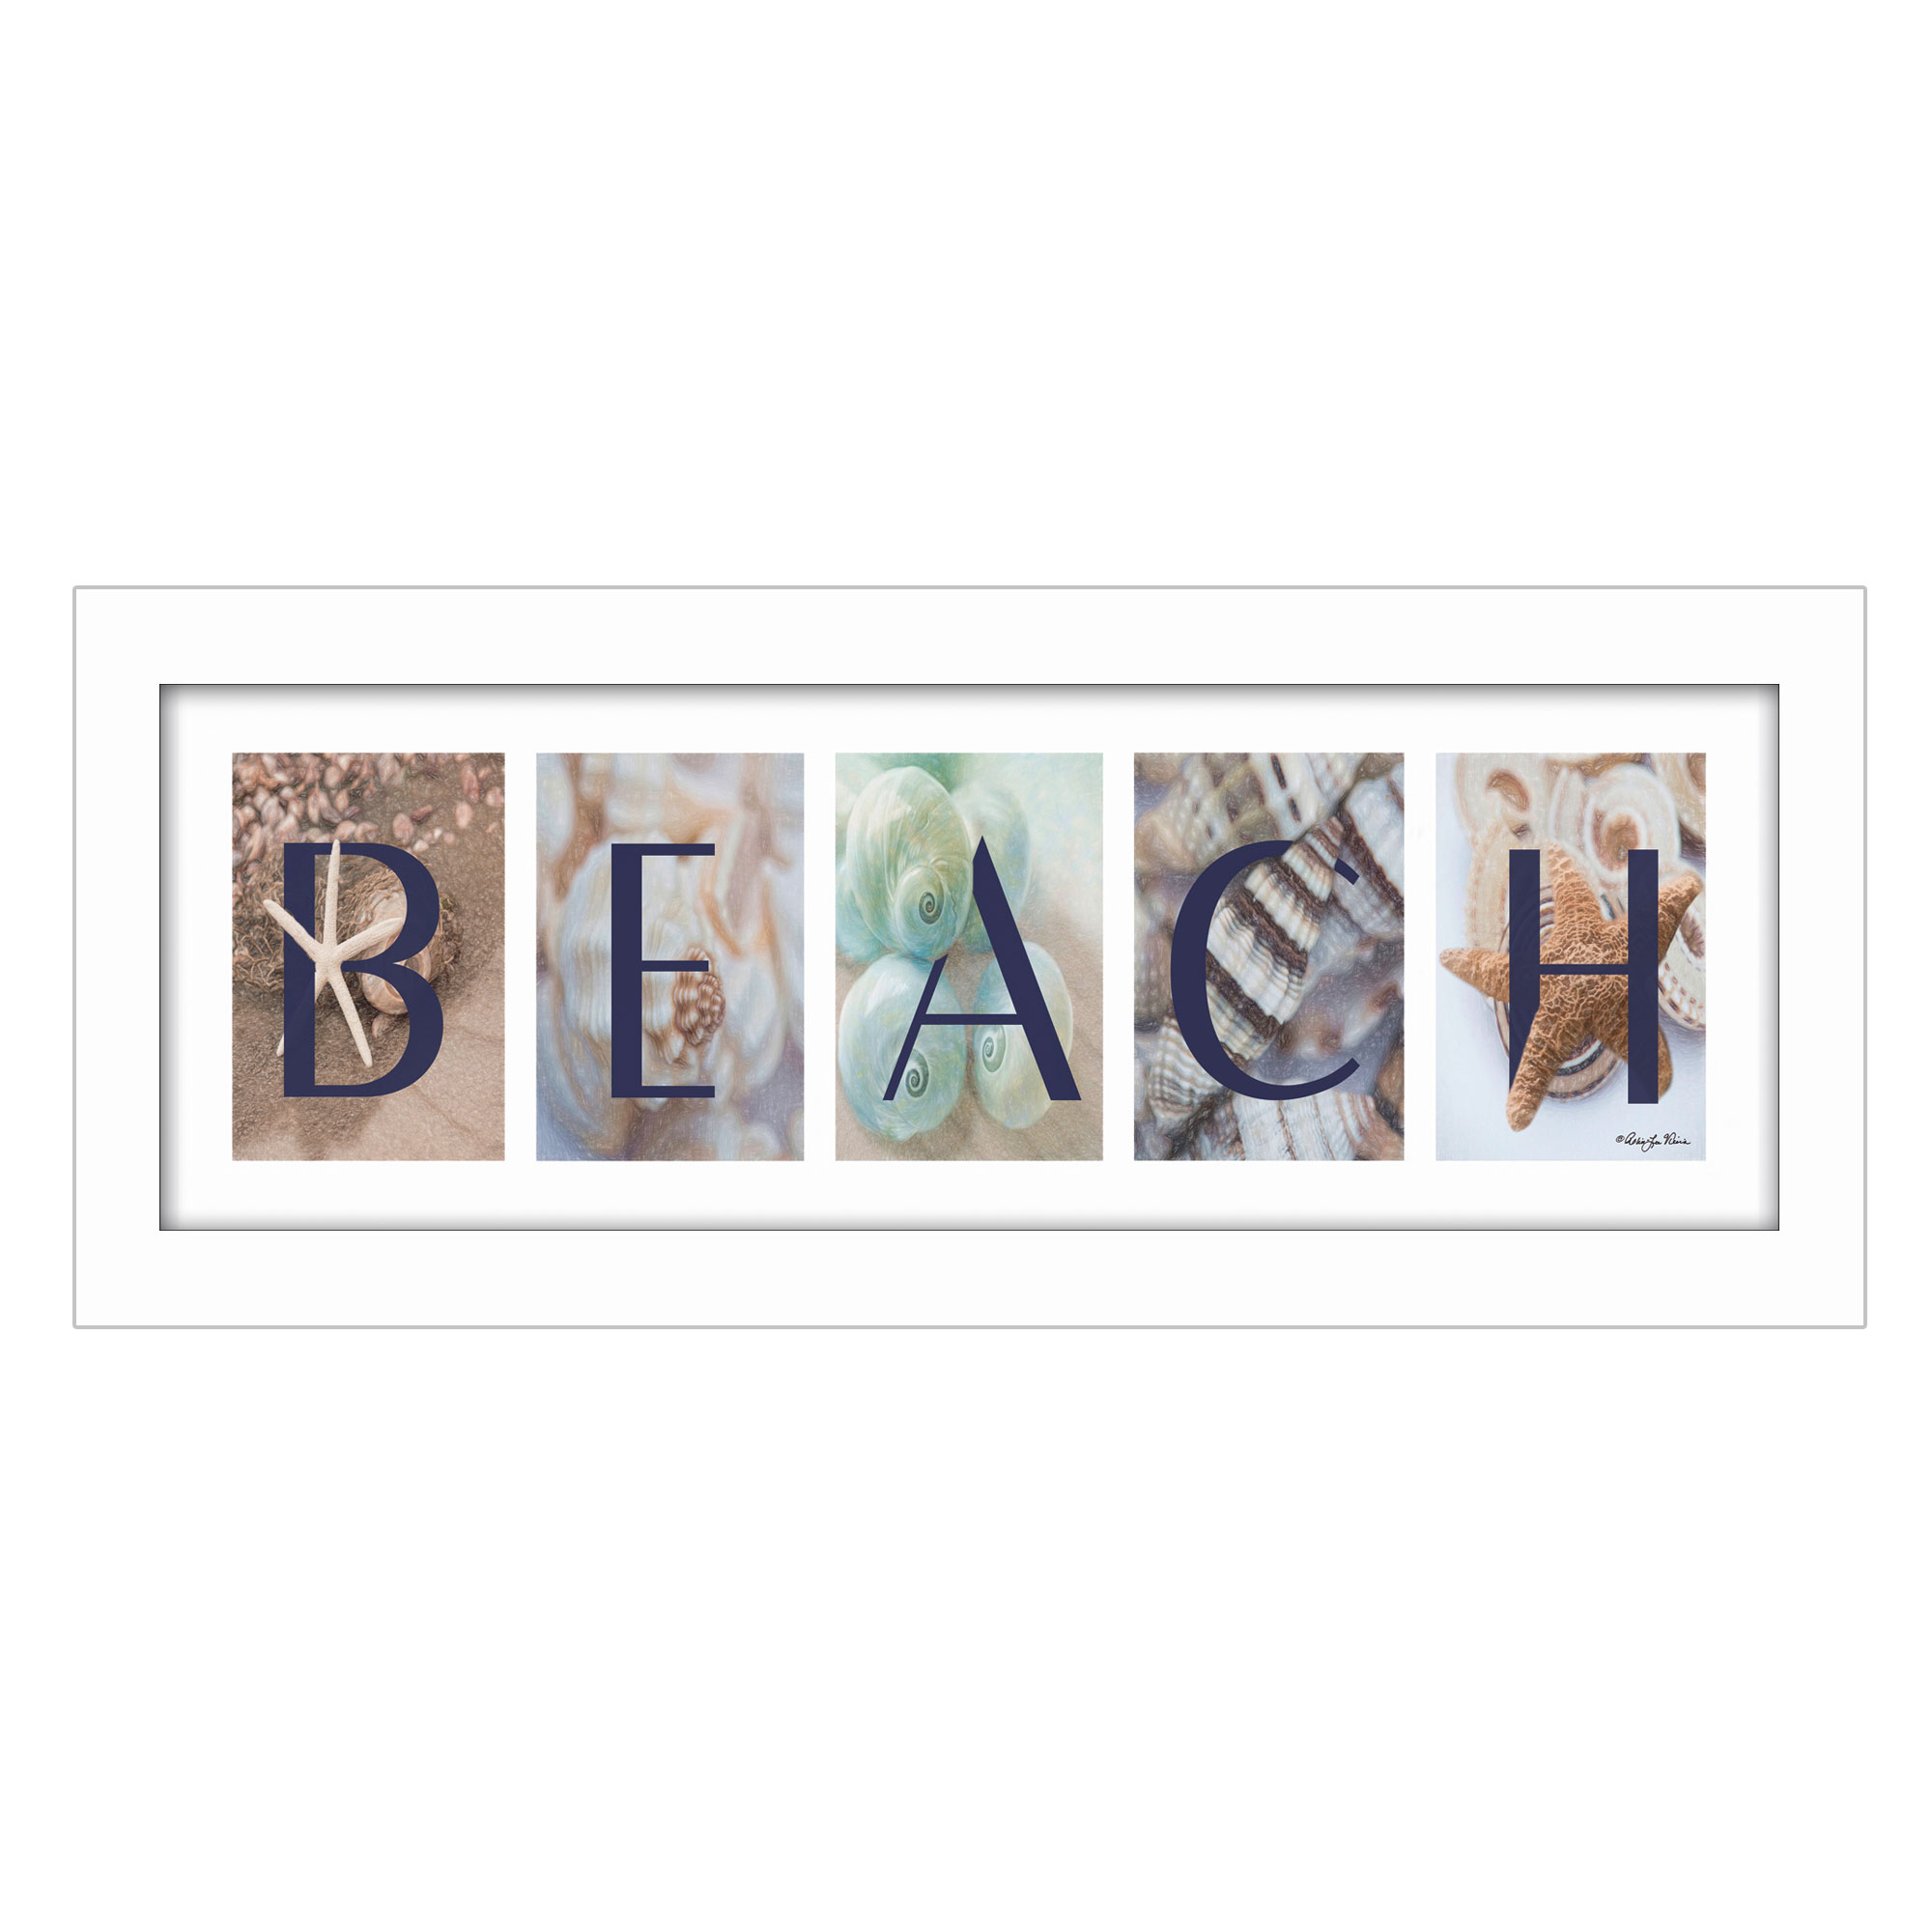 "Beach" By Robin-Lee Vieira, Printed Wall Art, Ready To Hang Framed Poster, White Frame